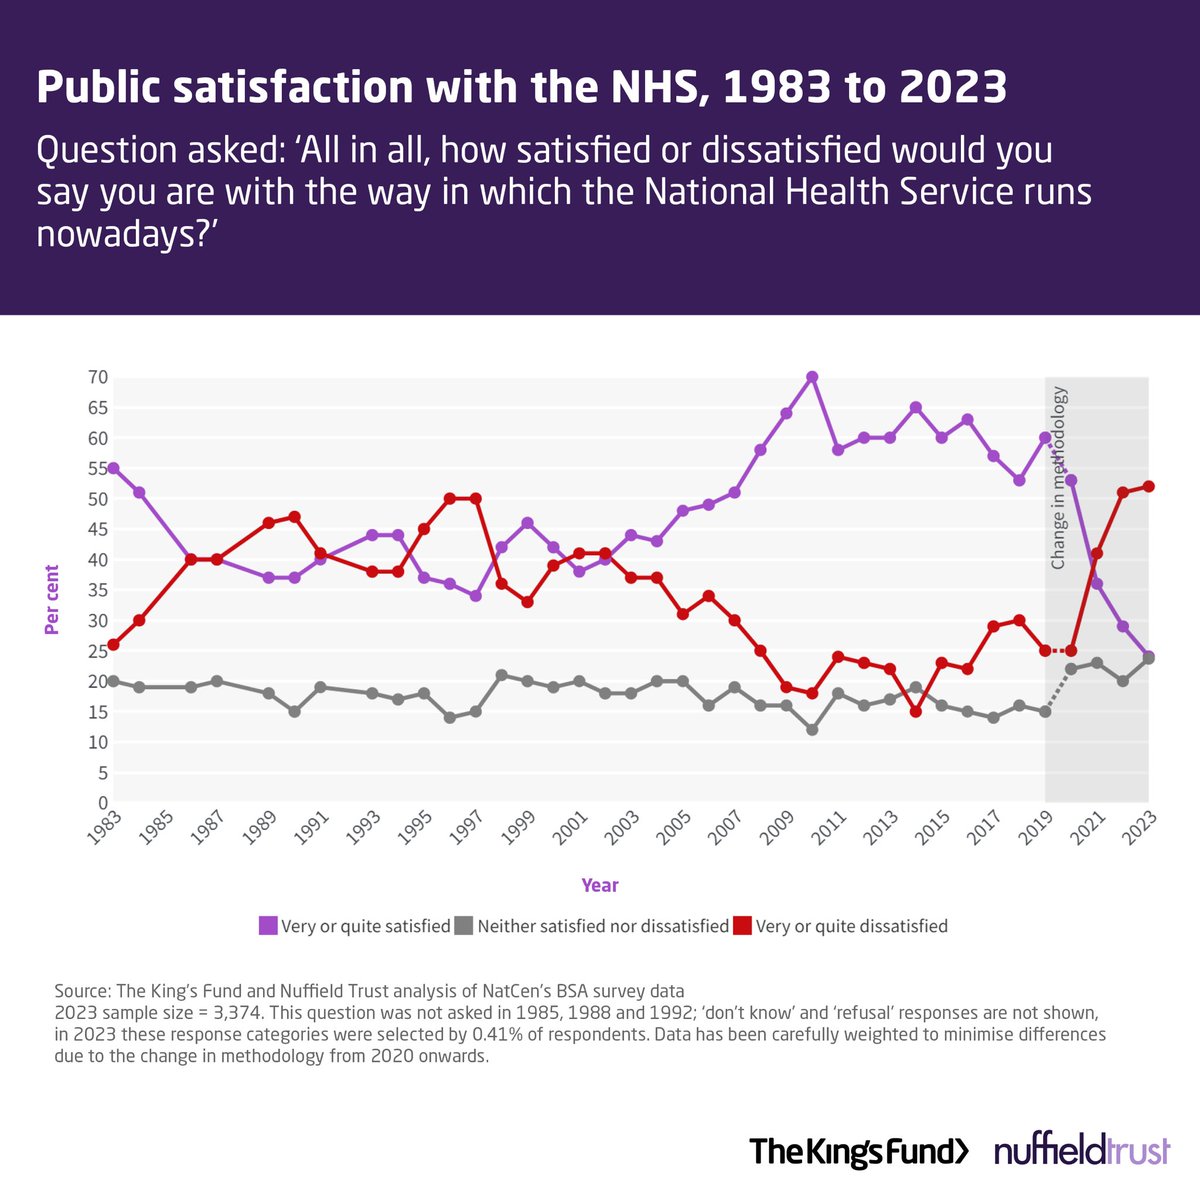 We can finally reveal the latest data on public satisfaction with the NHS and social care - with joint analysis from @TheKingsFund and @NuffieldTrust. The headlines do not make for happy reading. Satisfaction with NHS down to lowest ever in 40 years to 24%. ￼